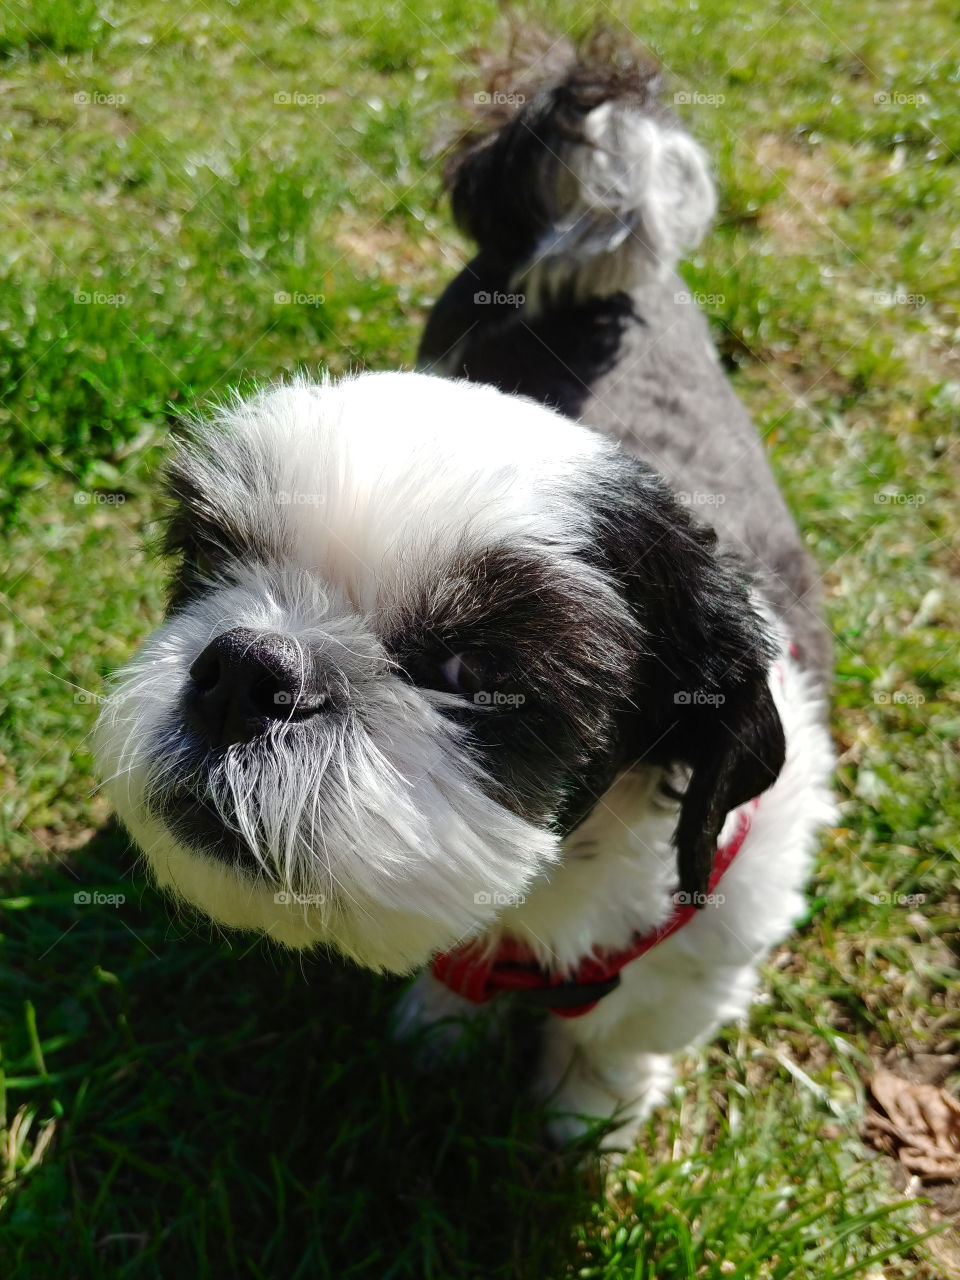 The view of the Shih-tzu dog on the grass